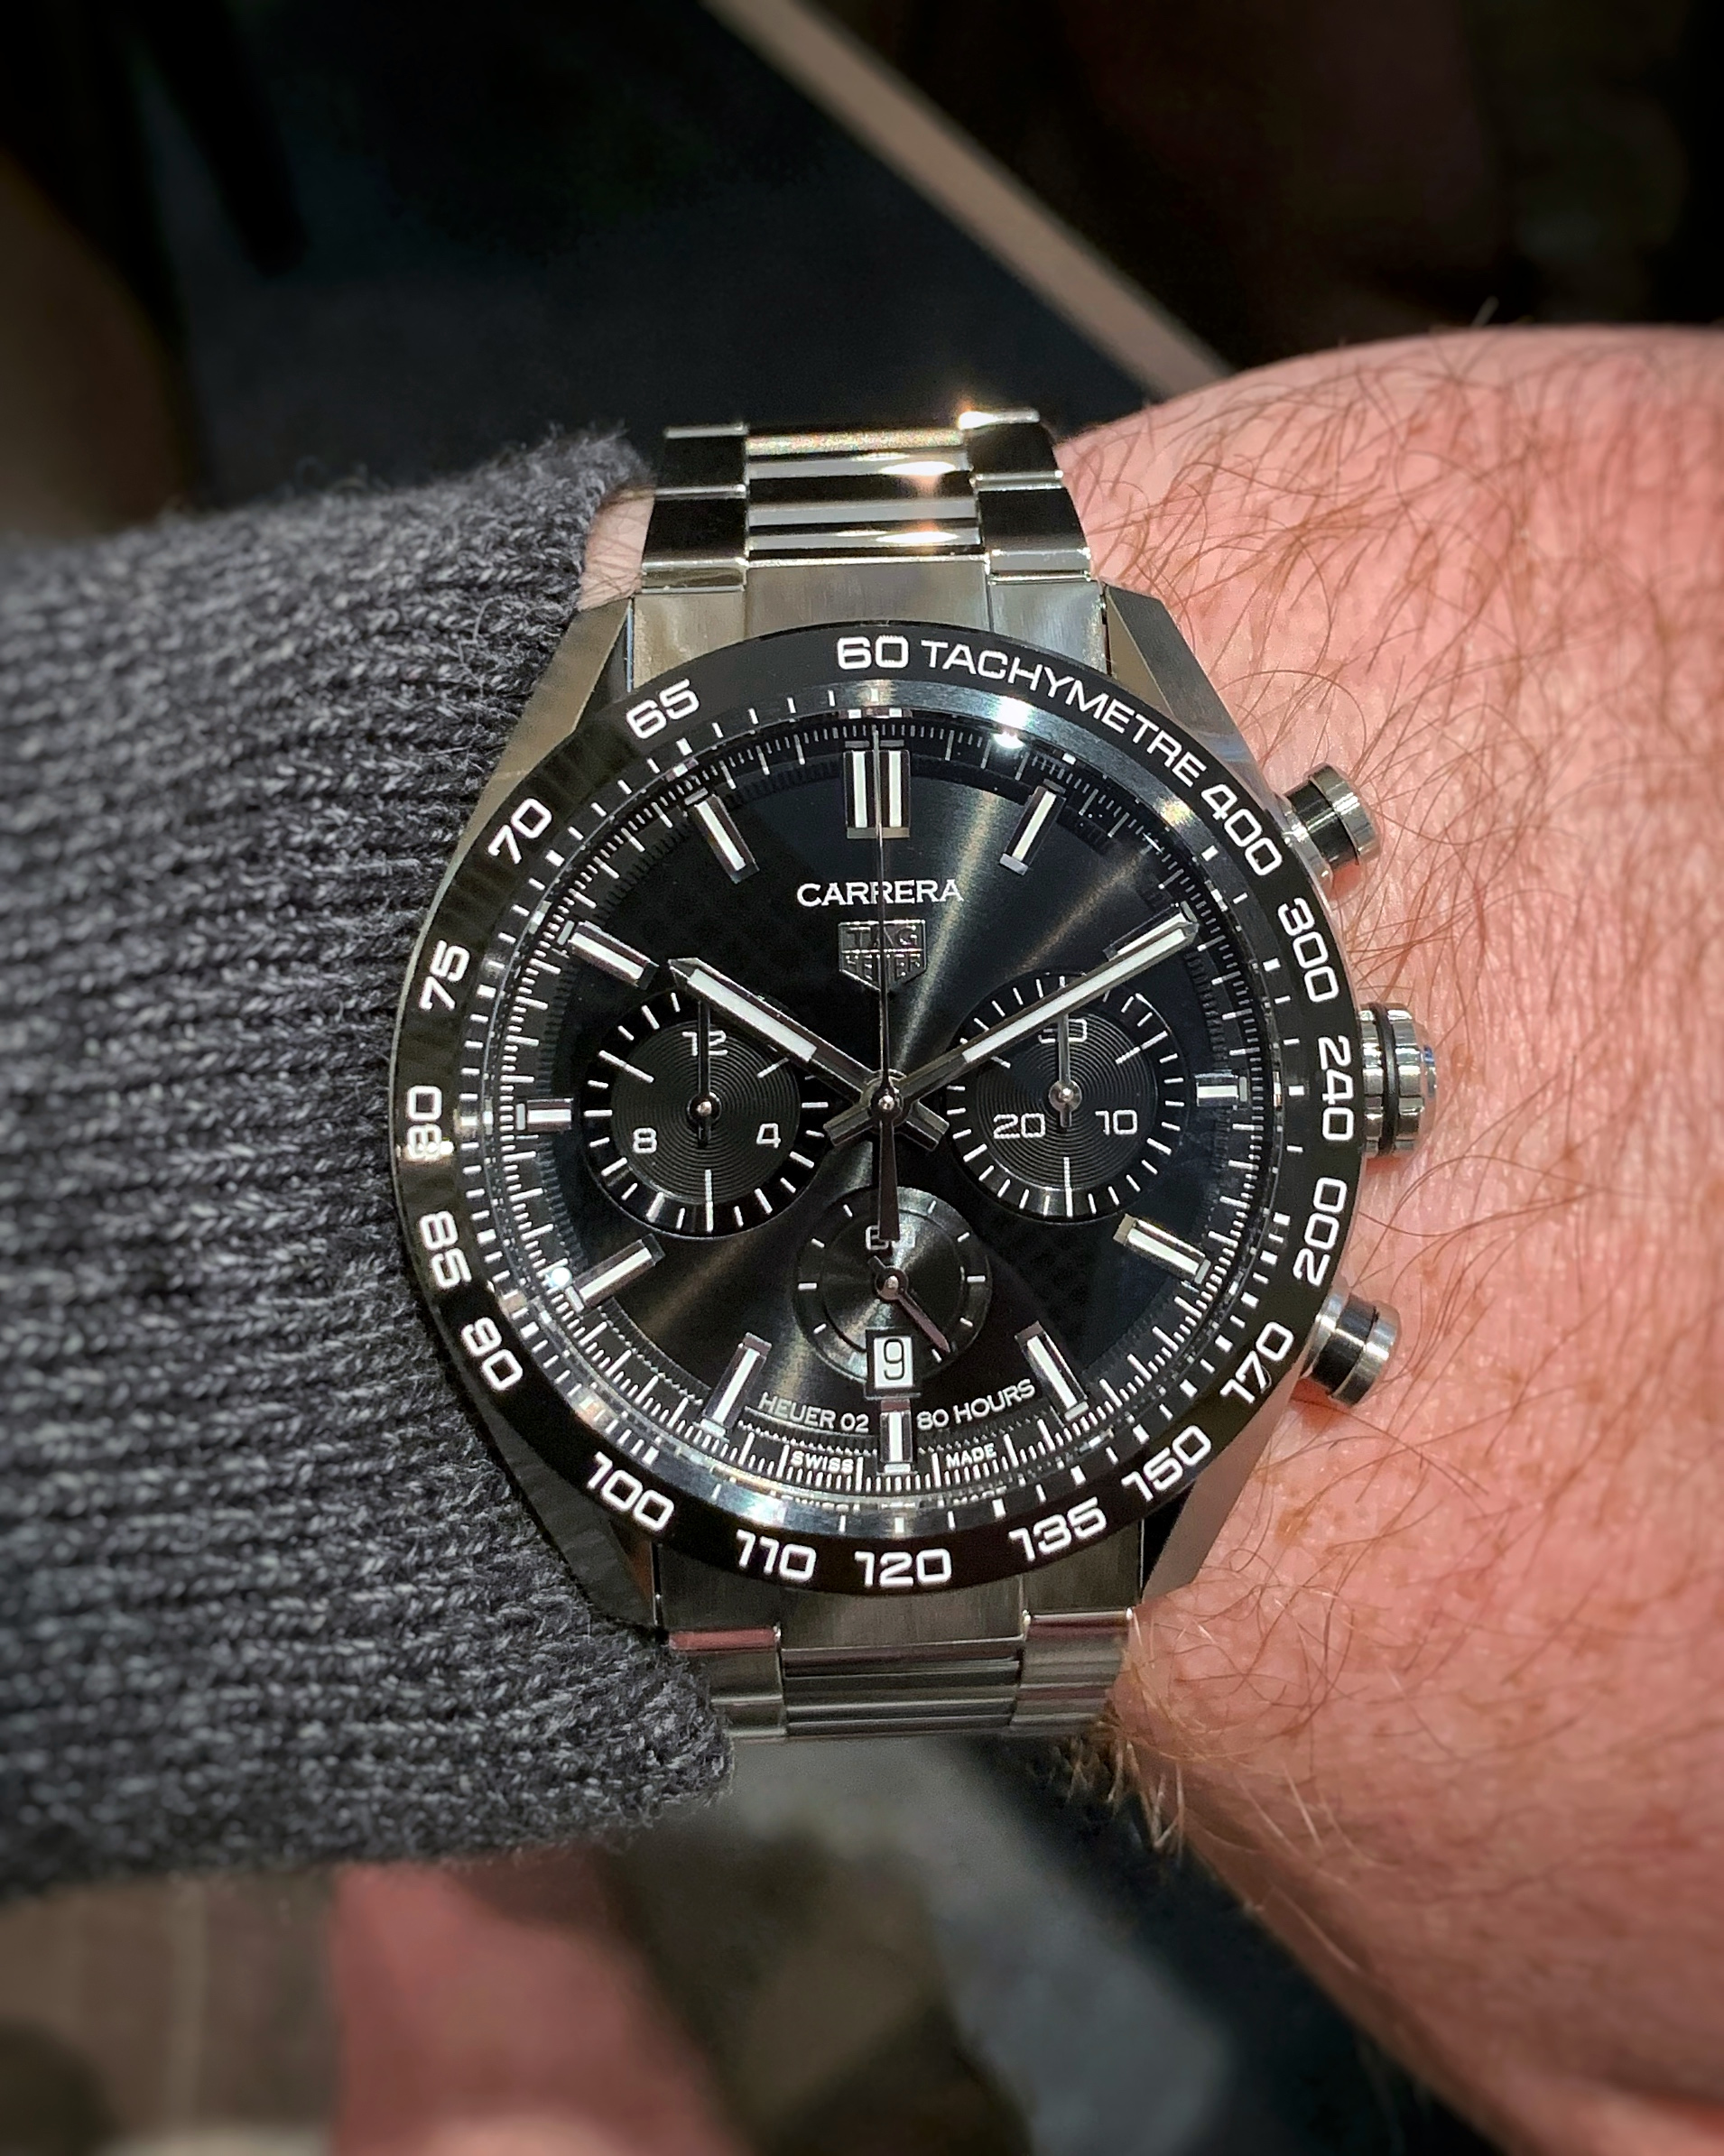 Spotlight: TAG Heuer Carrera - a brief history and review of the